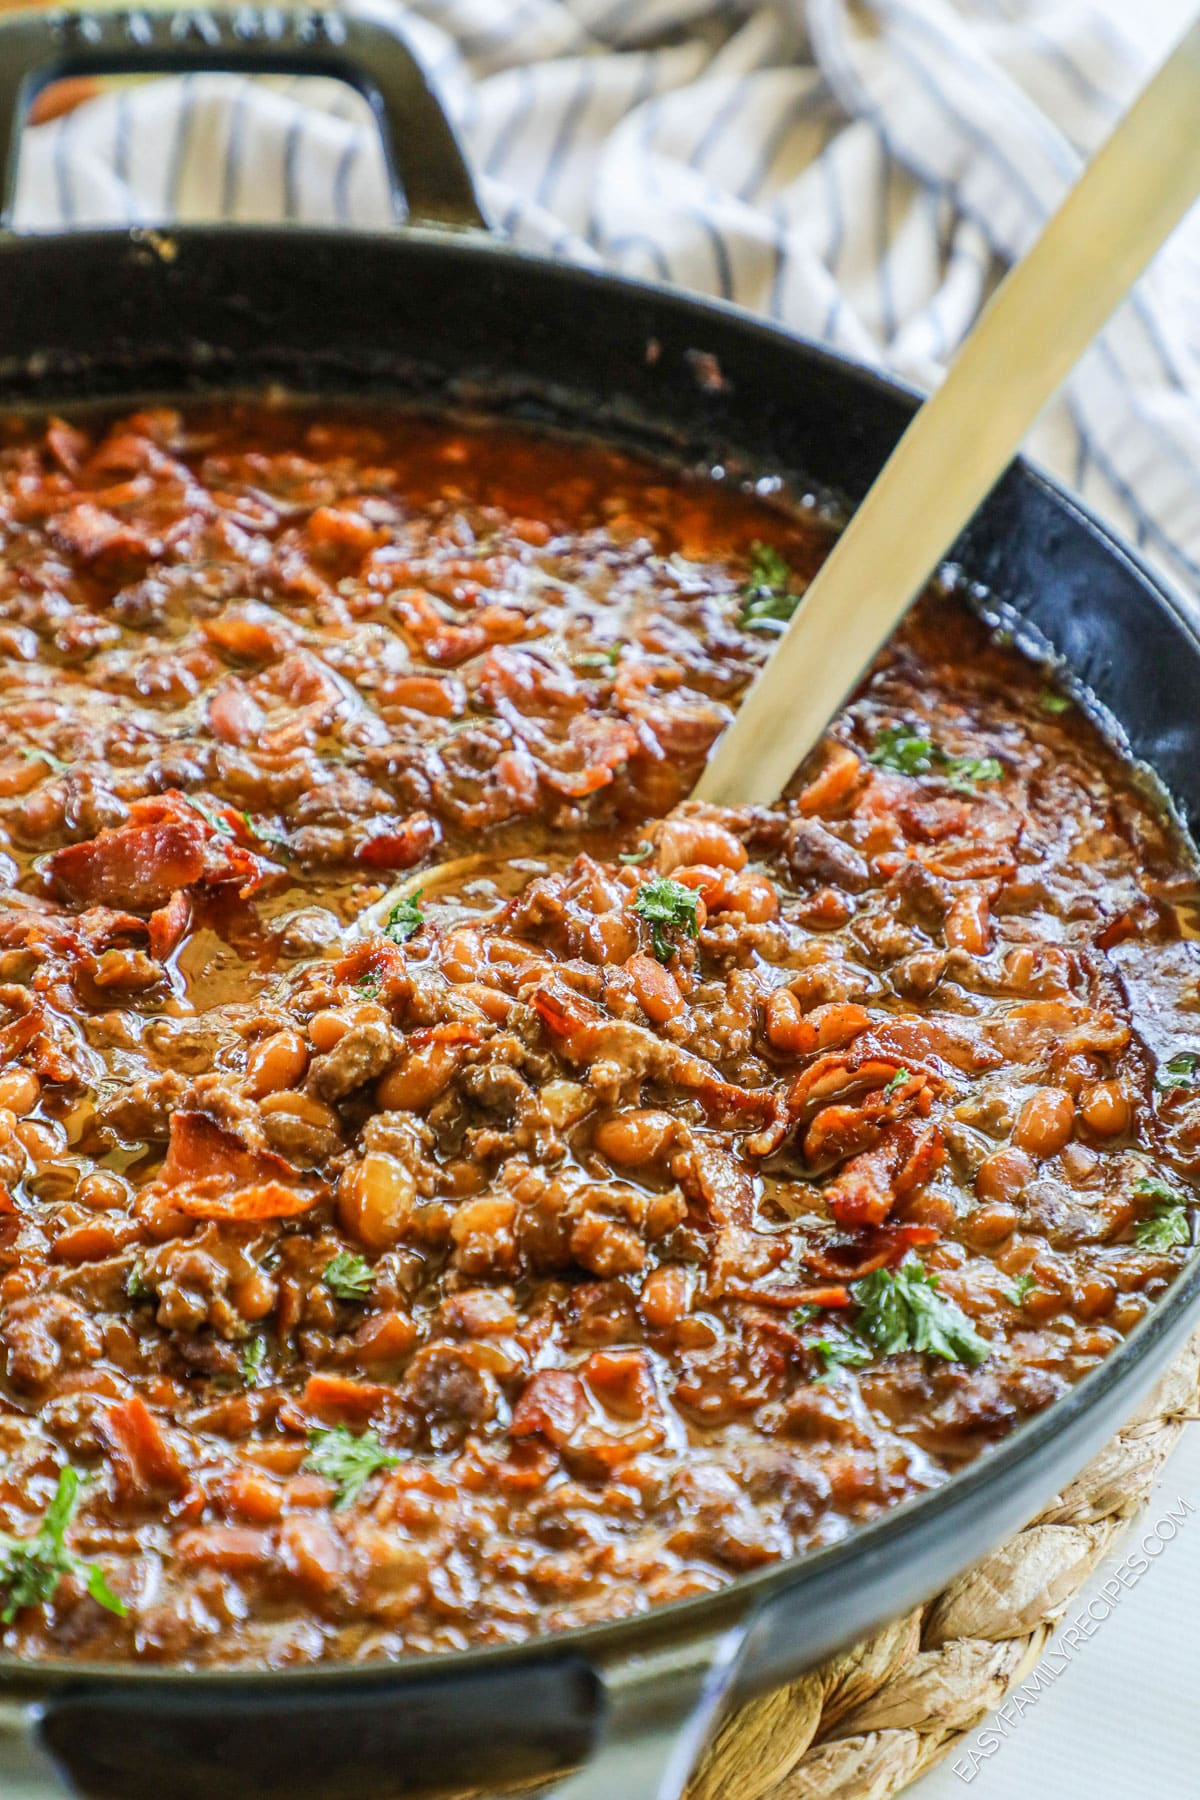 Skillet of cowboy baked beans with ground beef.